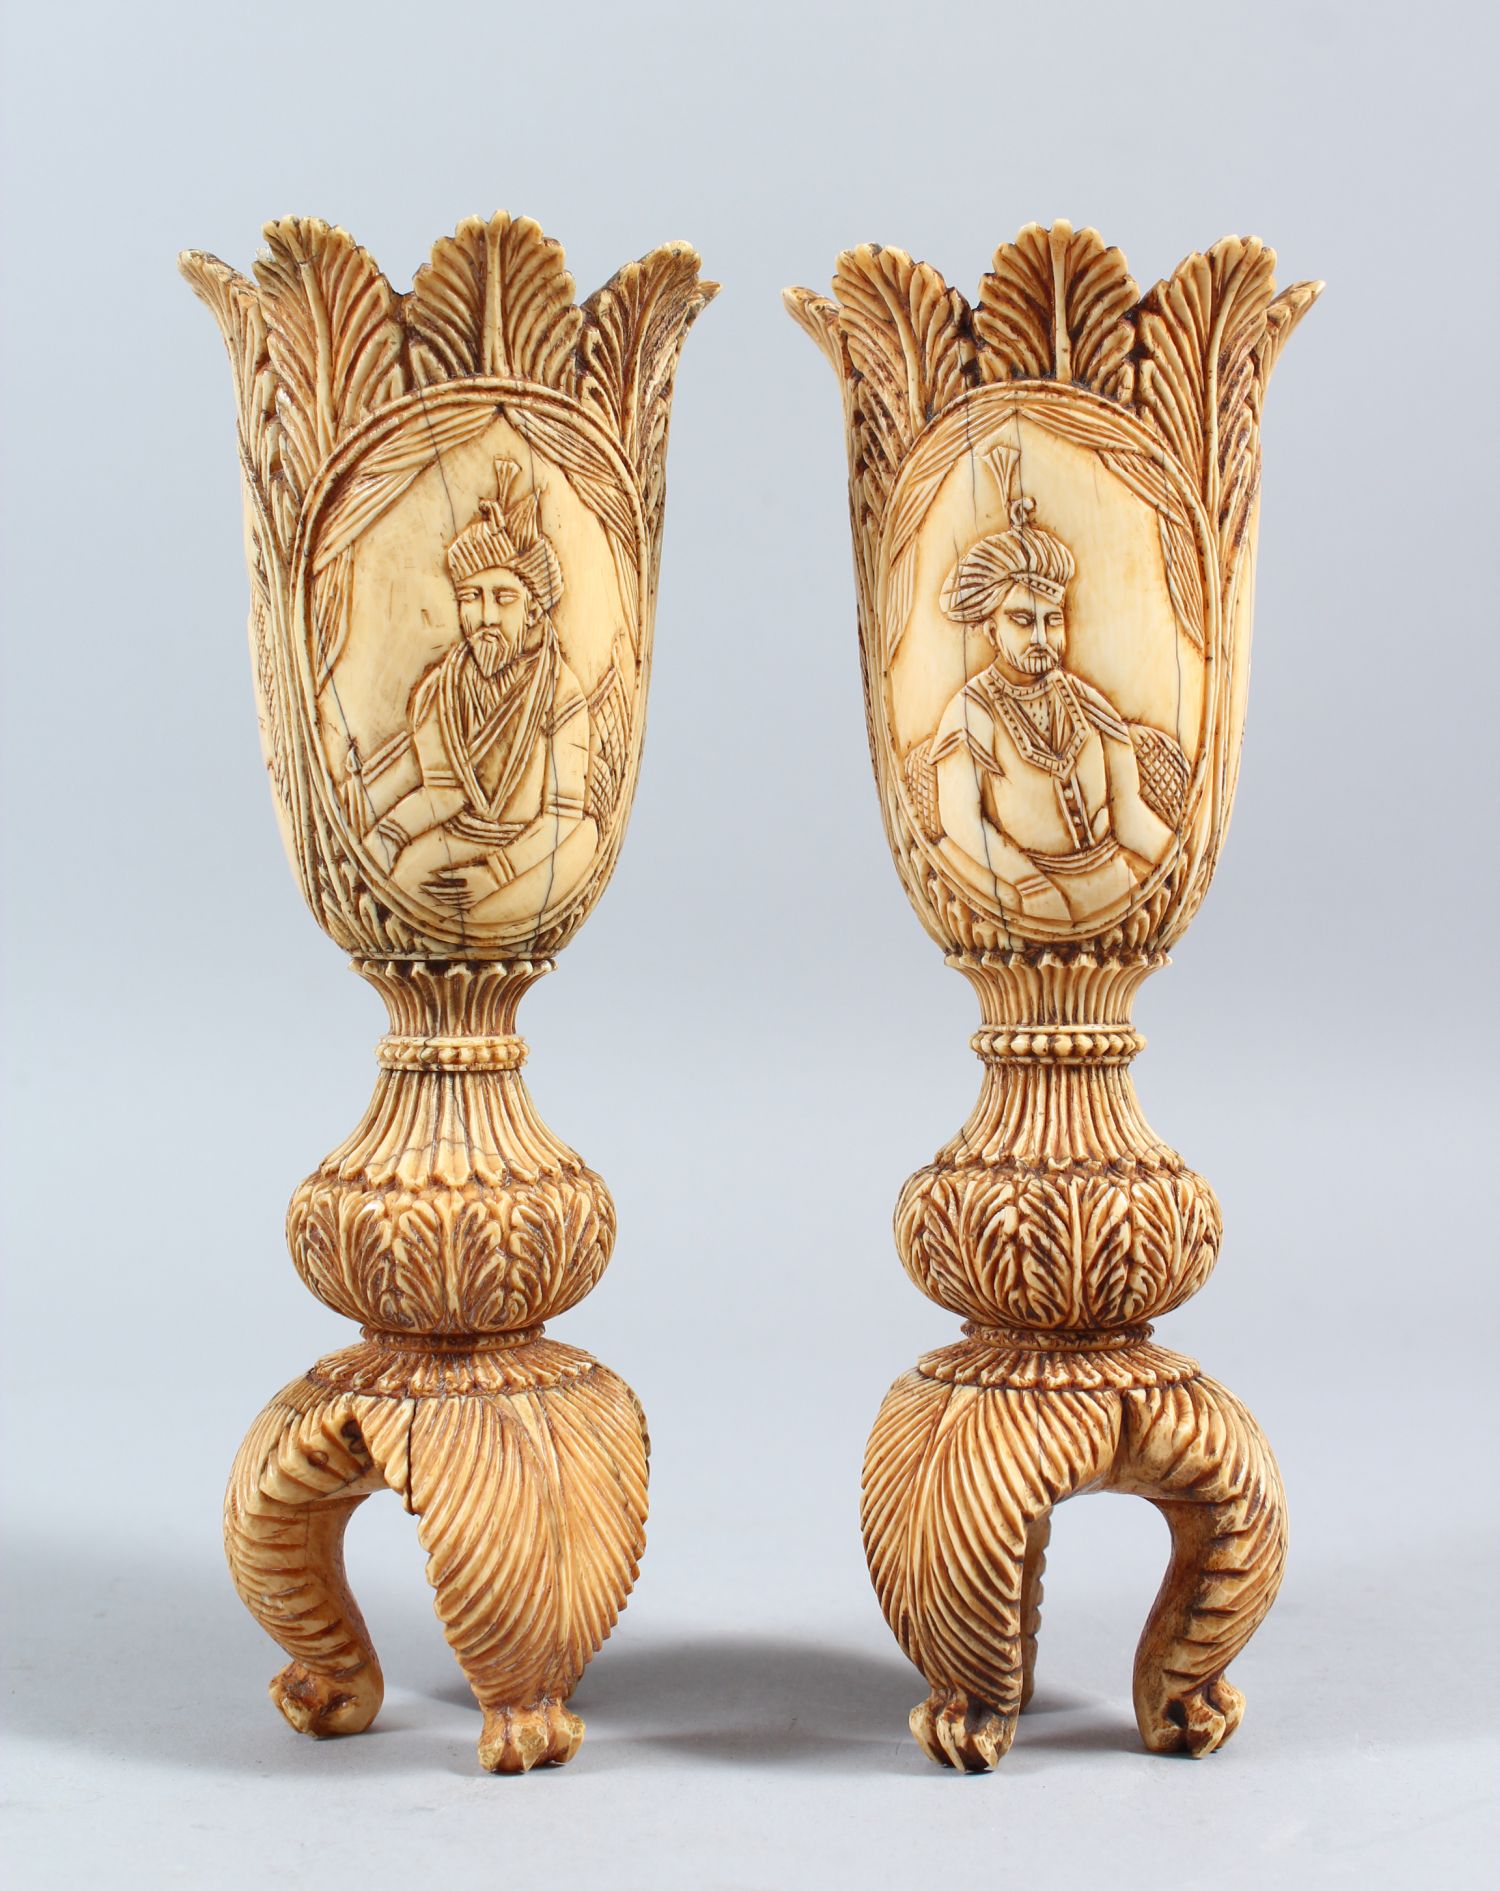 A PAIR OF 19TH CENTURY INDIAN CARVED IVORY TULIP SHAPED VASES, depicting Mughal rulers and consorts,